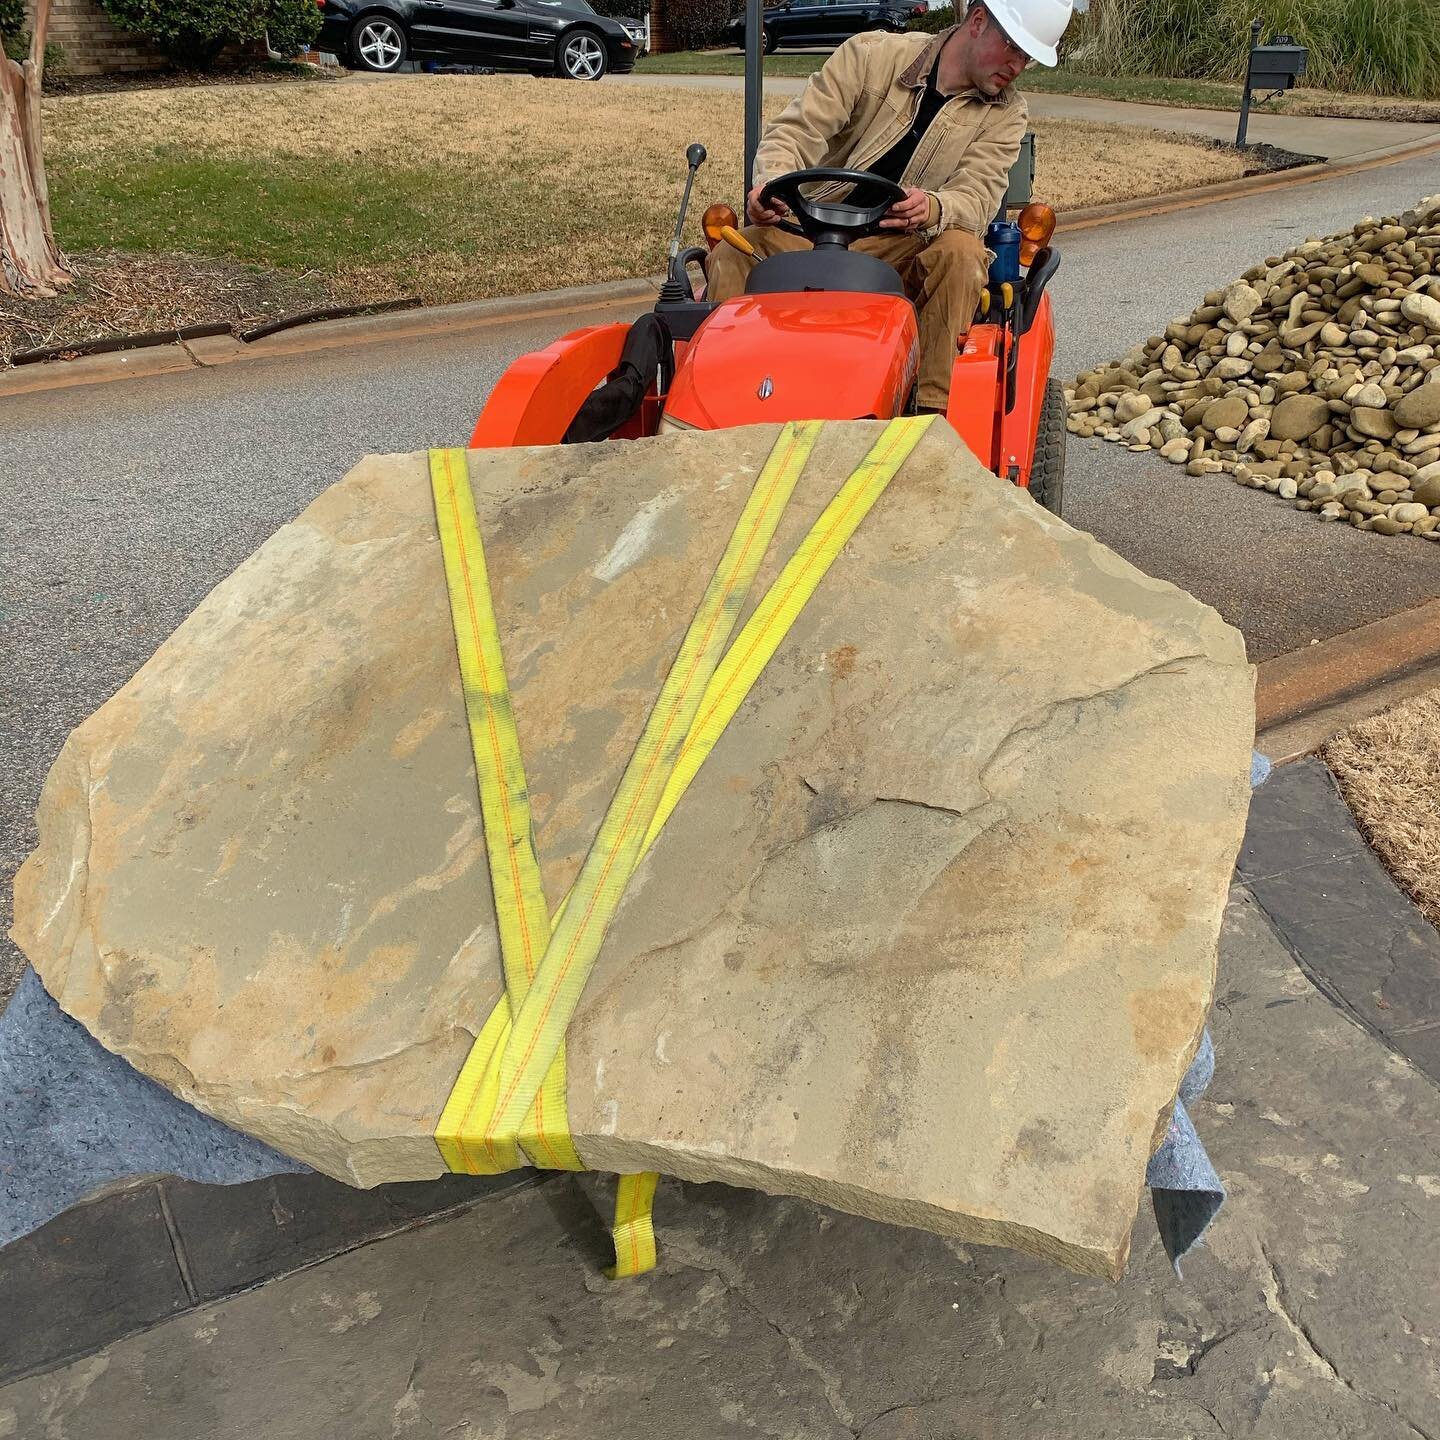 STONE BRIDGE:

Adding these slabs to a dry creek bed to allow our client to access the back of their property. 

These stones blend into the environment seamlessly and provide a great function.